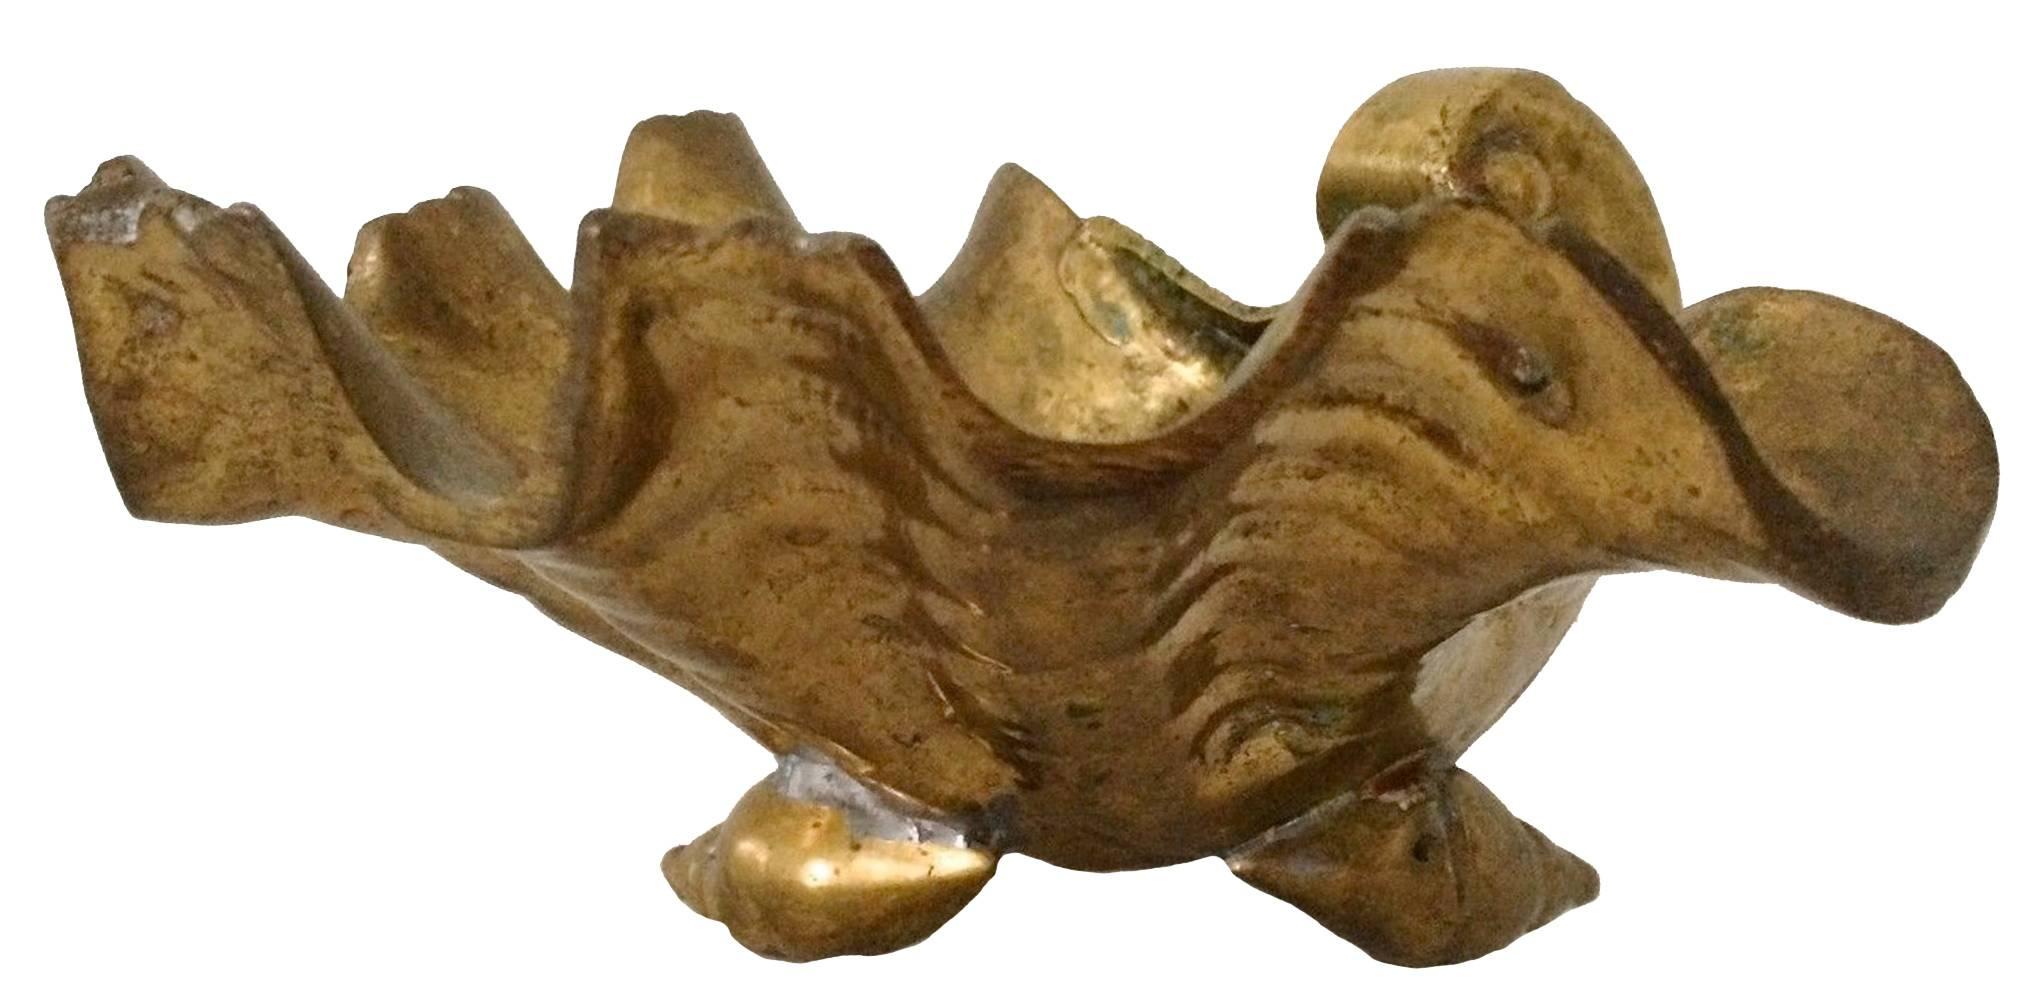 Hollywood Regency solid cast brass shell bowl on three shell feet. Overall unpolished patina.